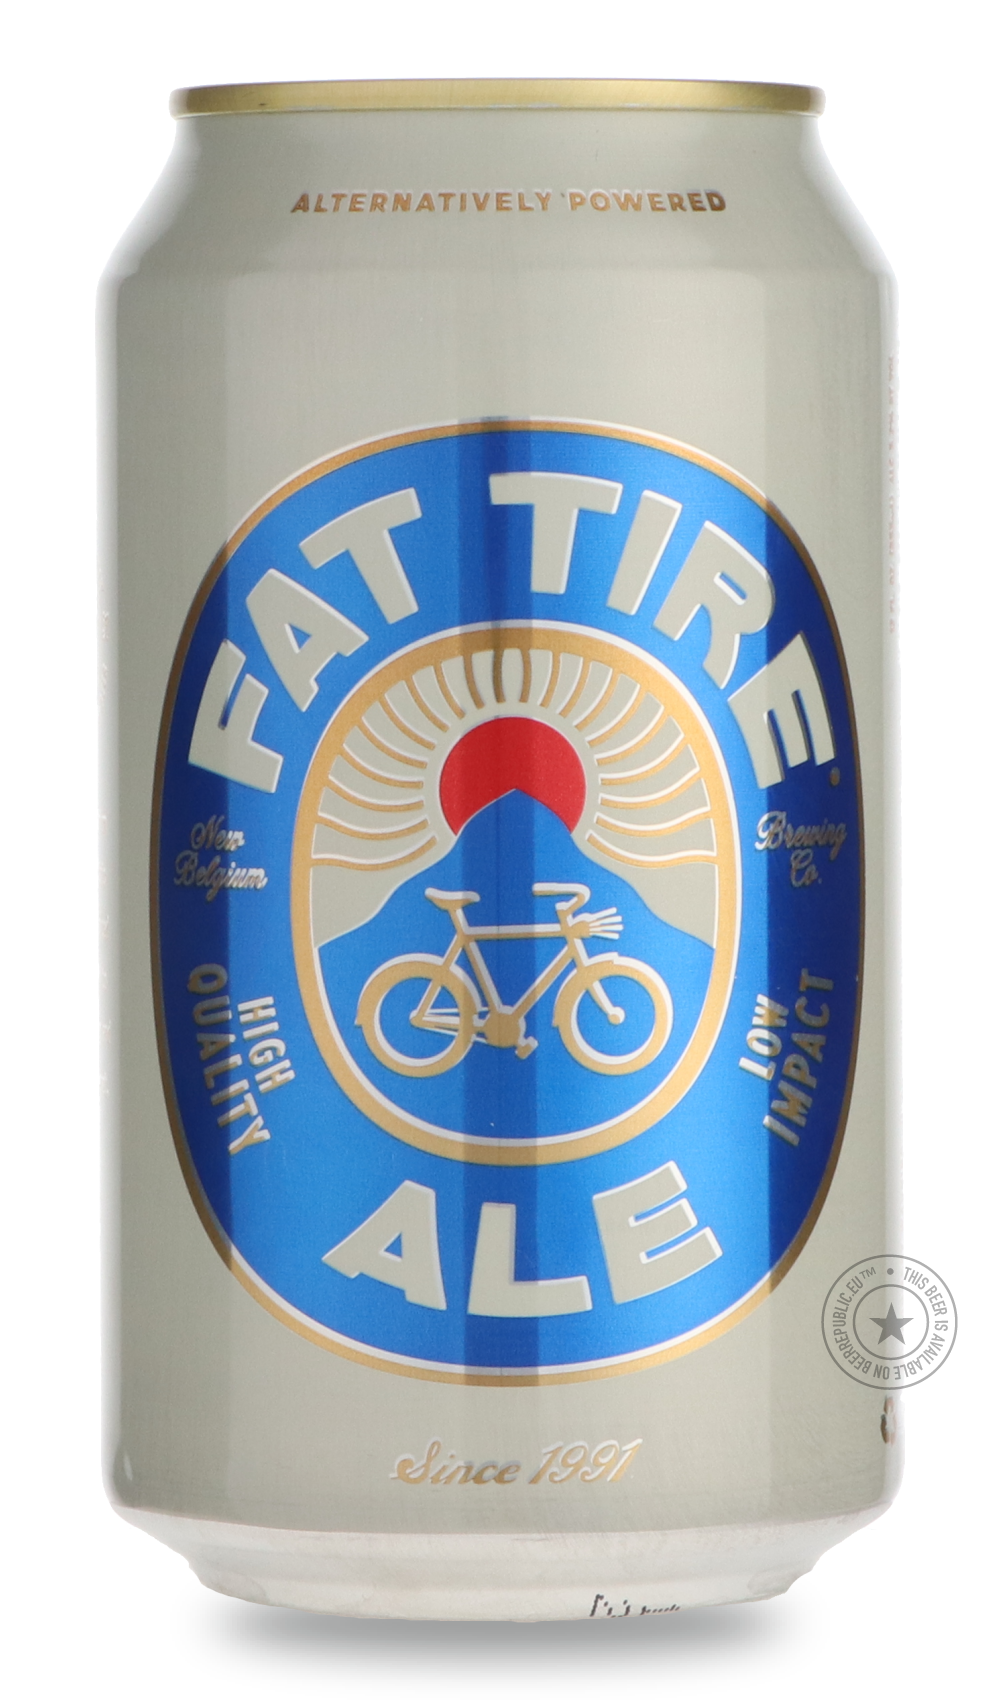 -New Belgium- Fat Tire-Pale- Only @ Beer Republic - The best online beer store for American & Canadian craft beer - Buy beer online from the USA and Canada - Bier online kopen - Amerikaans bier kopen - Craft beer store - Craft beer kopen - Amerikanisch bier kaufen - Bier online kaufen - Acheter biere online - IPA - Stout - Porter - New England IPA - Hazy IPA - Imperial Stout - Barrel Aged - Barrel Aged Imperial Stout - Brown - Dark beer - Blond - Blonde - Pilsner - Lager - Wheat - Weizen - Amber - Barley Wi